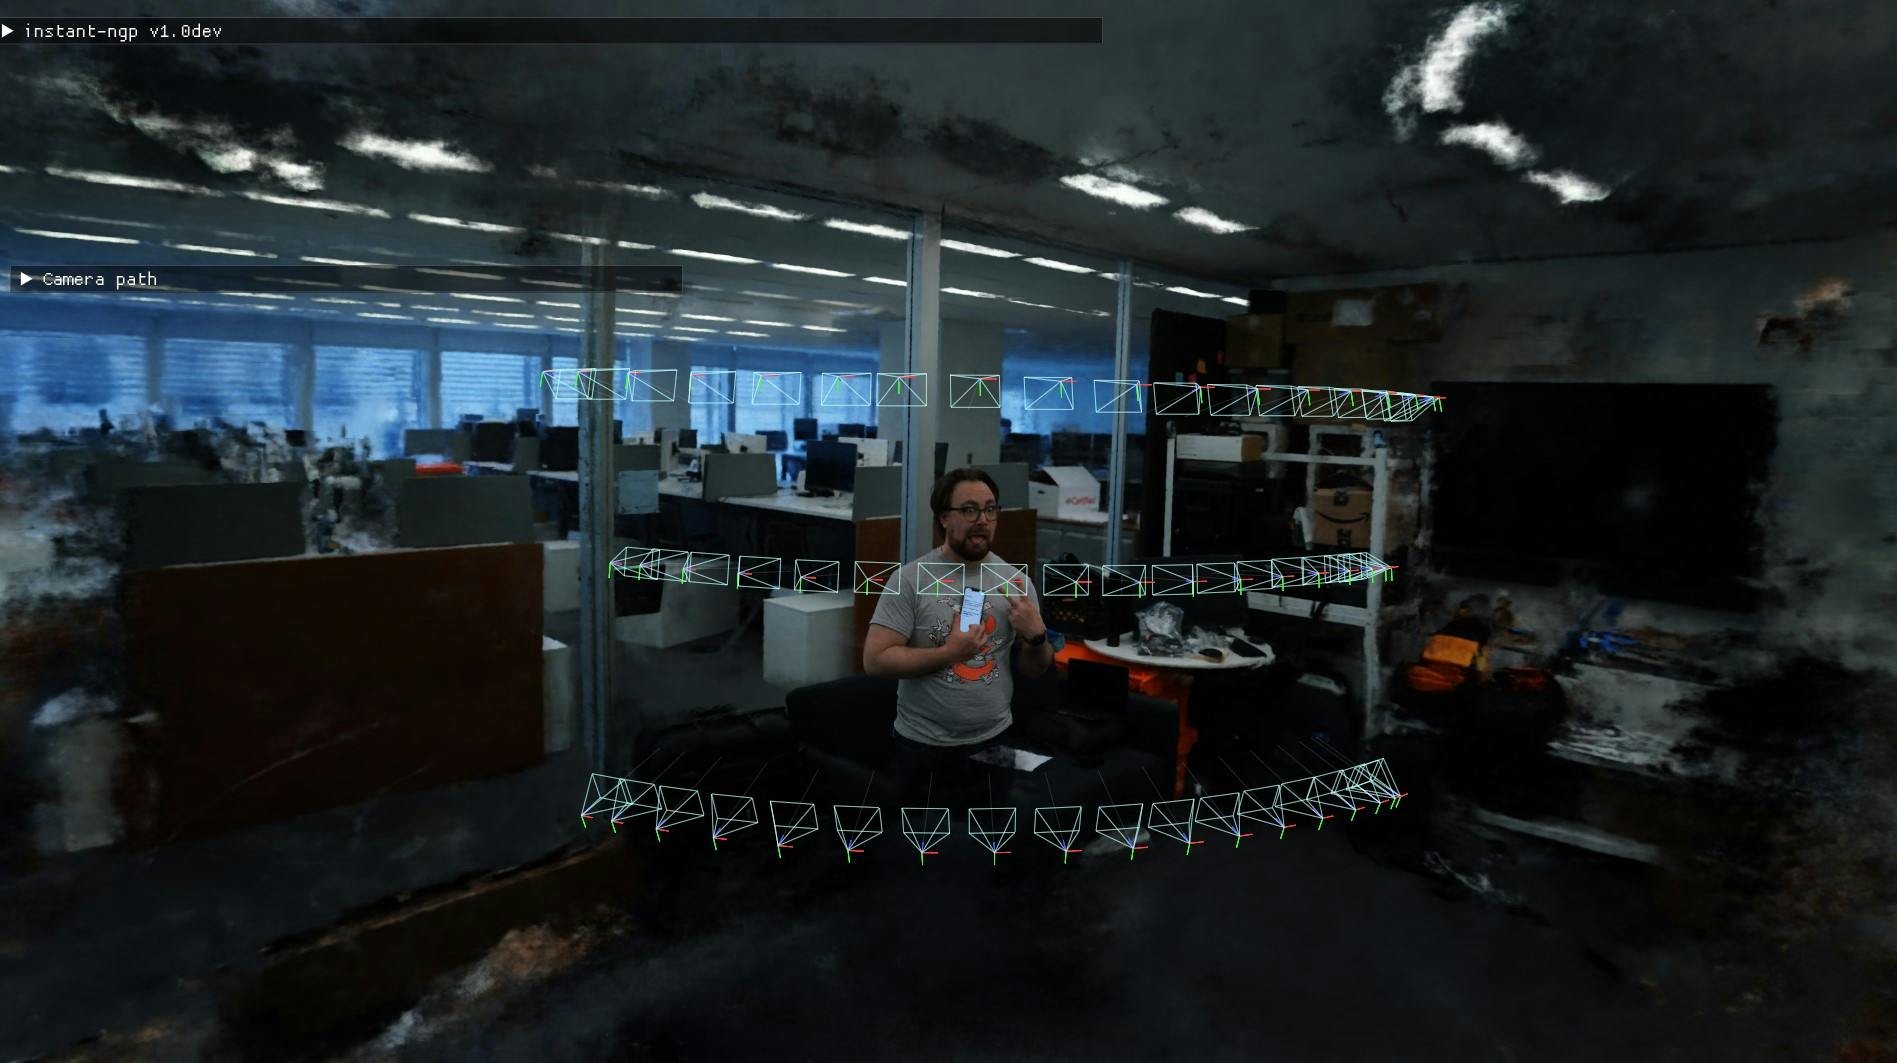 An image of a man posing in the middle of The New York Times office floor. Overlaid on the image is a 3D diagram and a line of code in the top left corner.